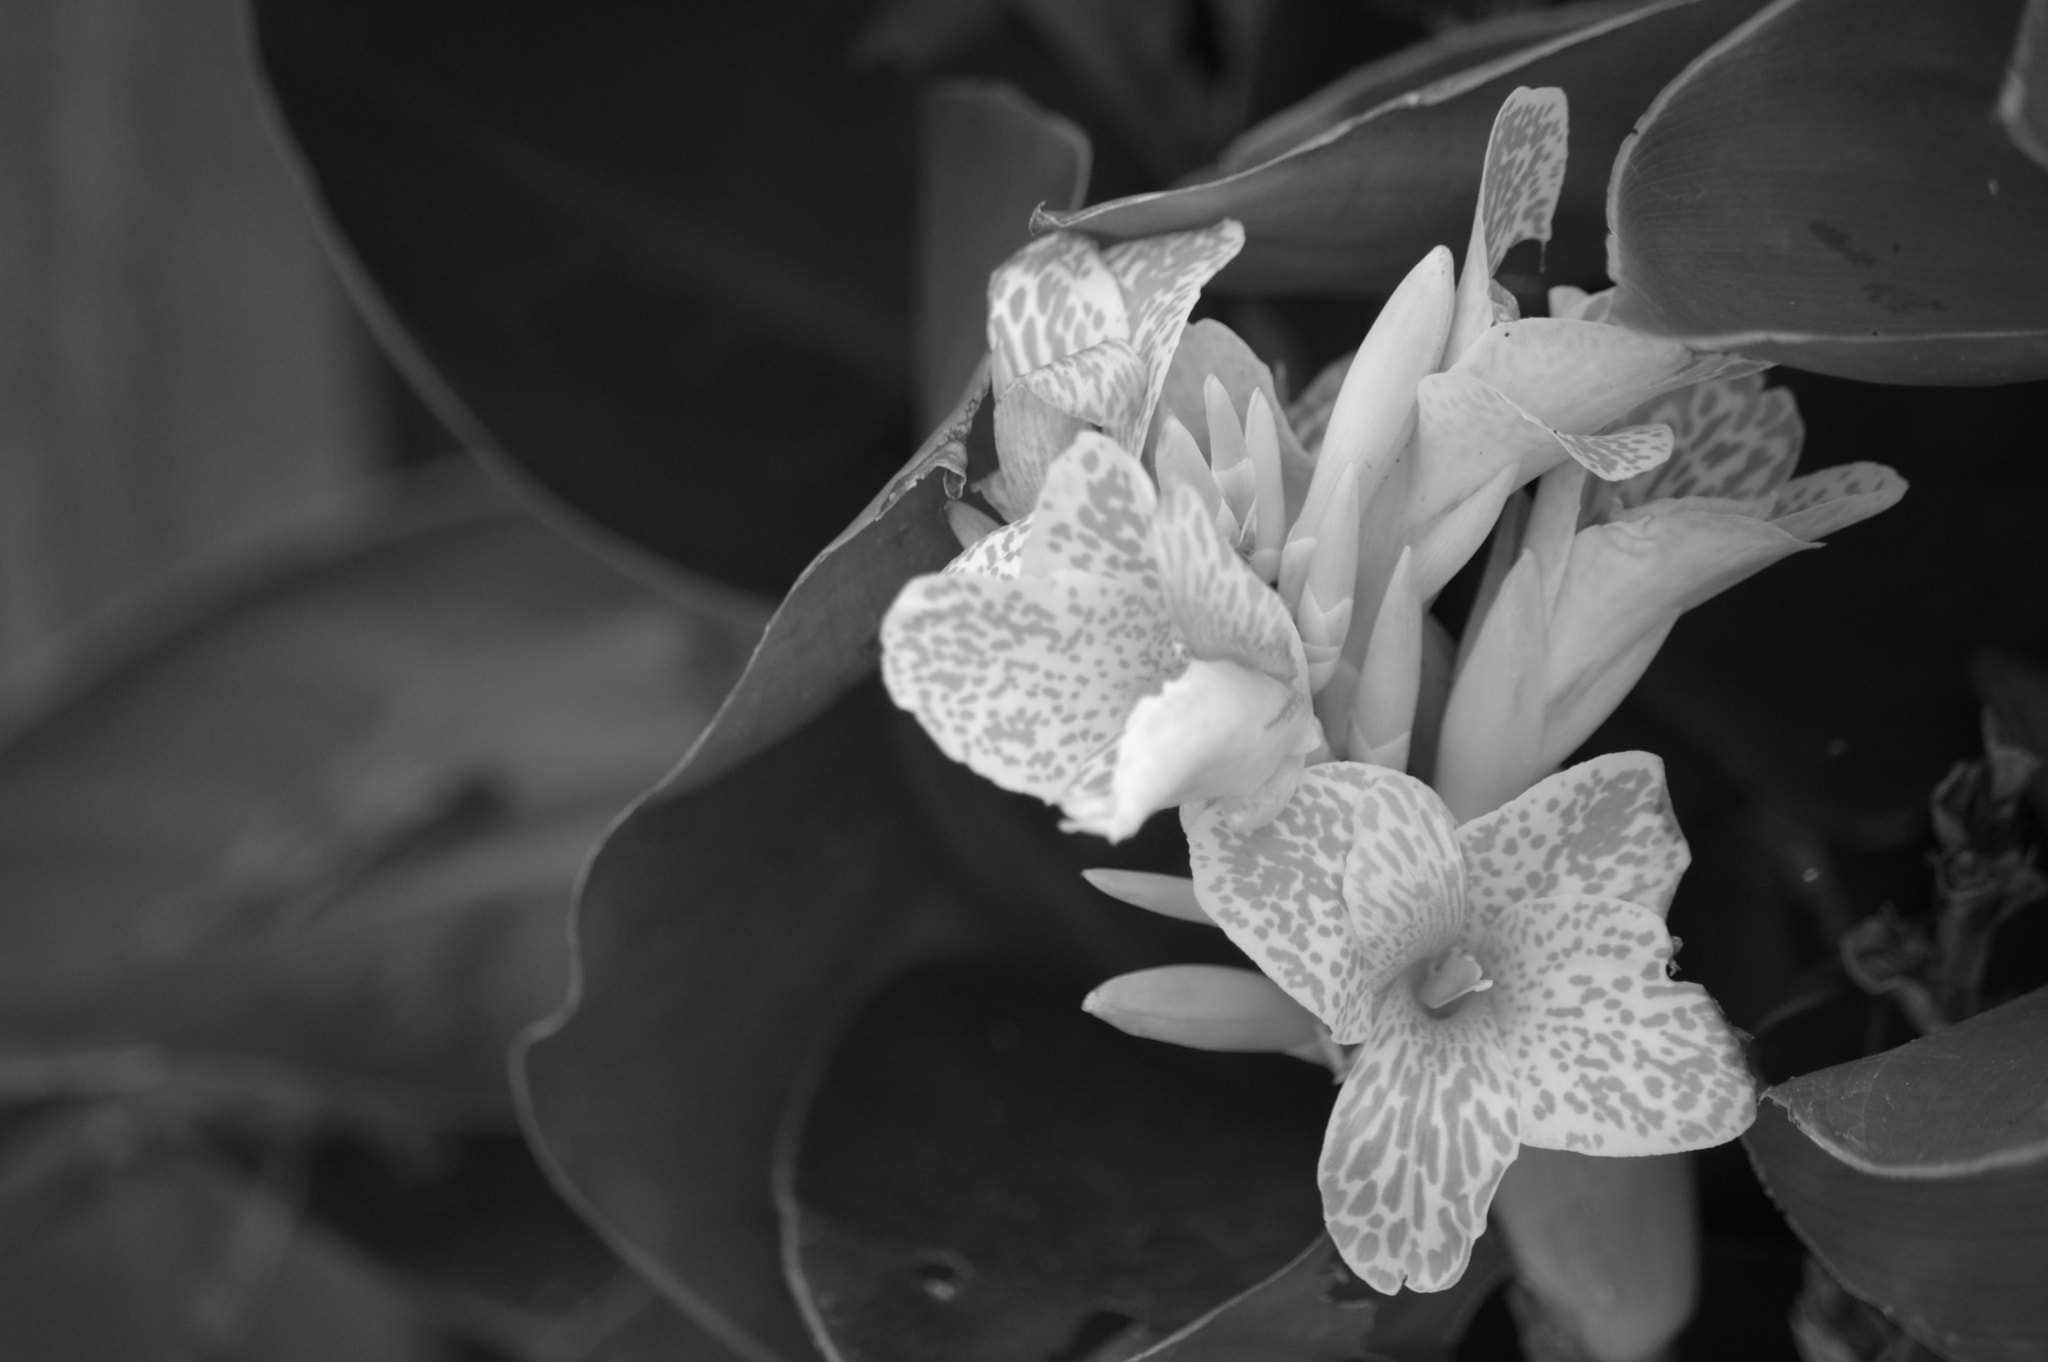 Pentax K-3 sample photo. Beauty in black and white photography